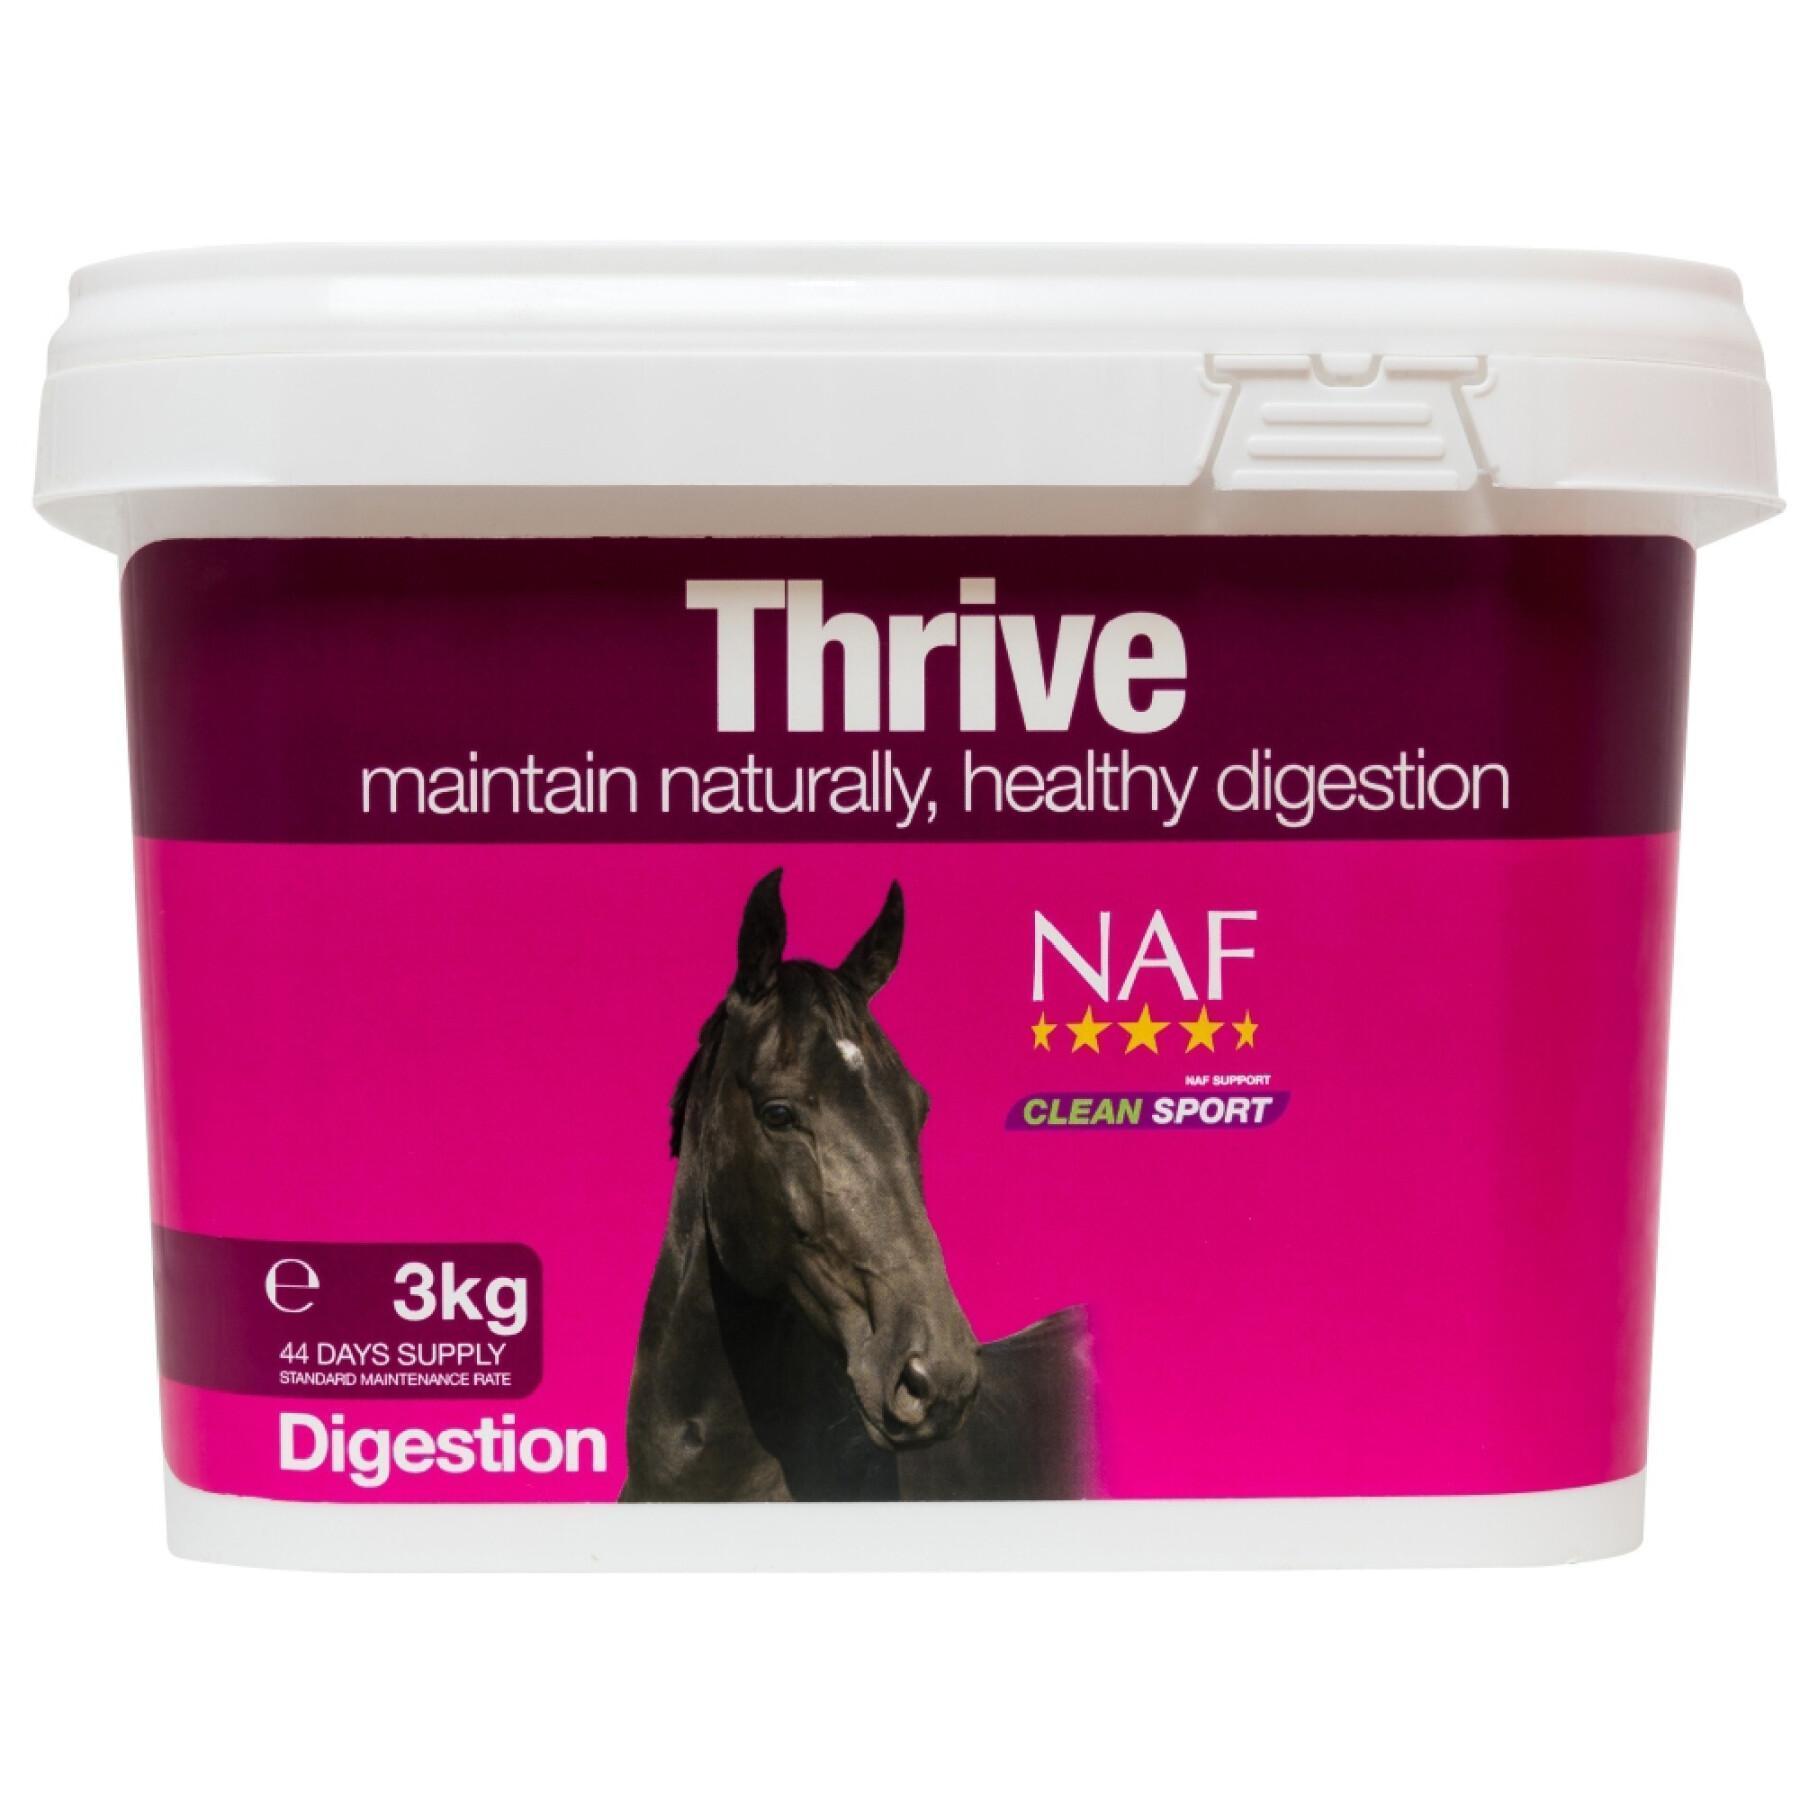 Complementary joint support for horses NAF Thrive